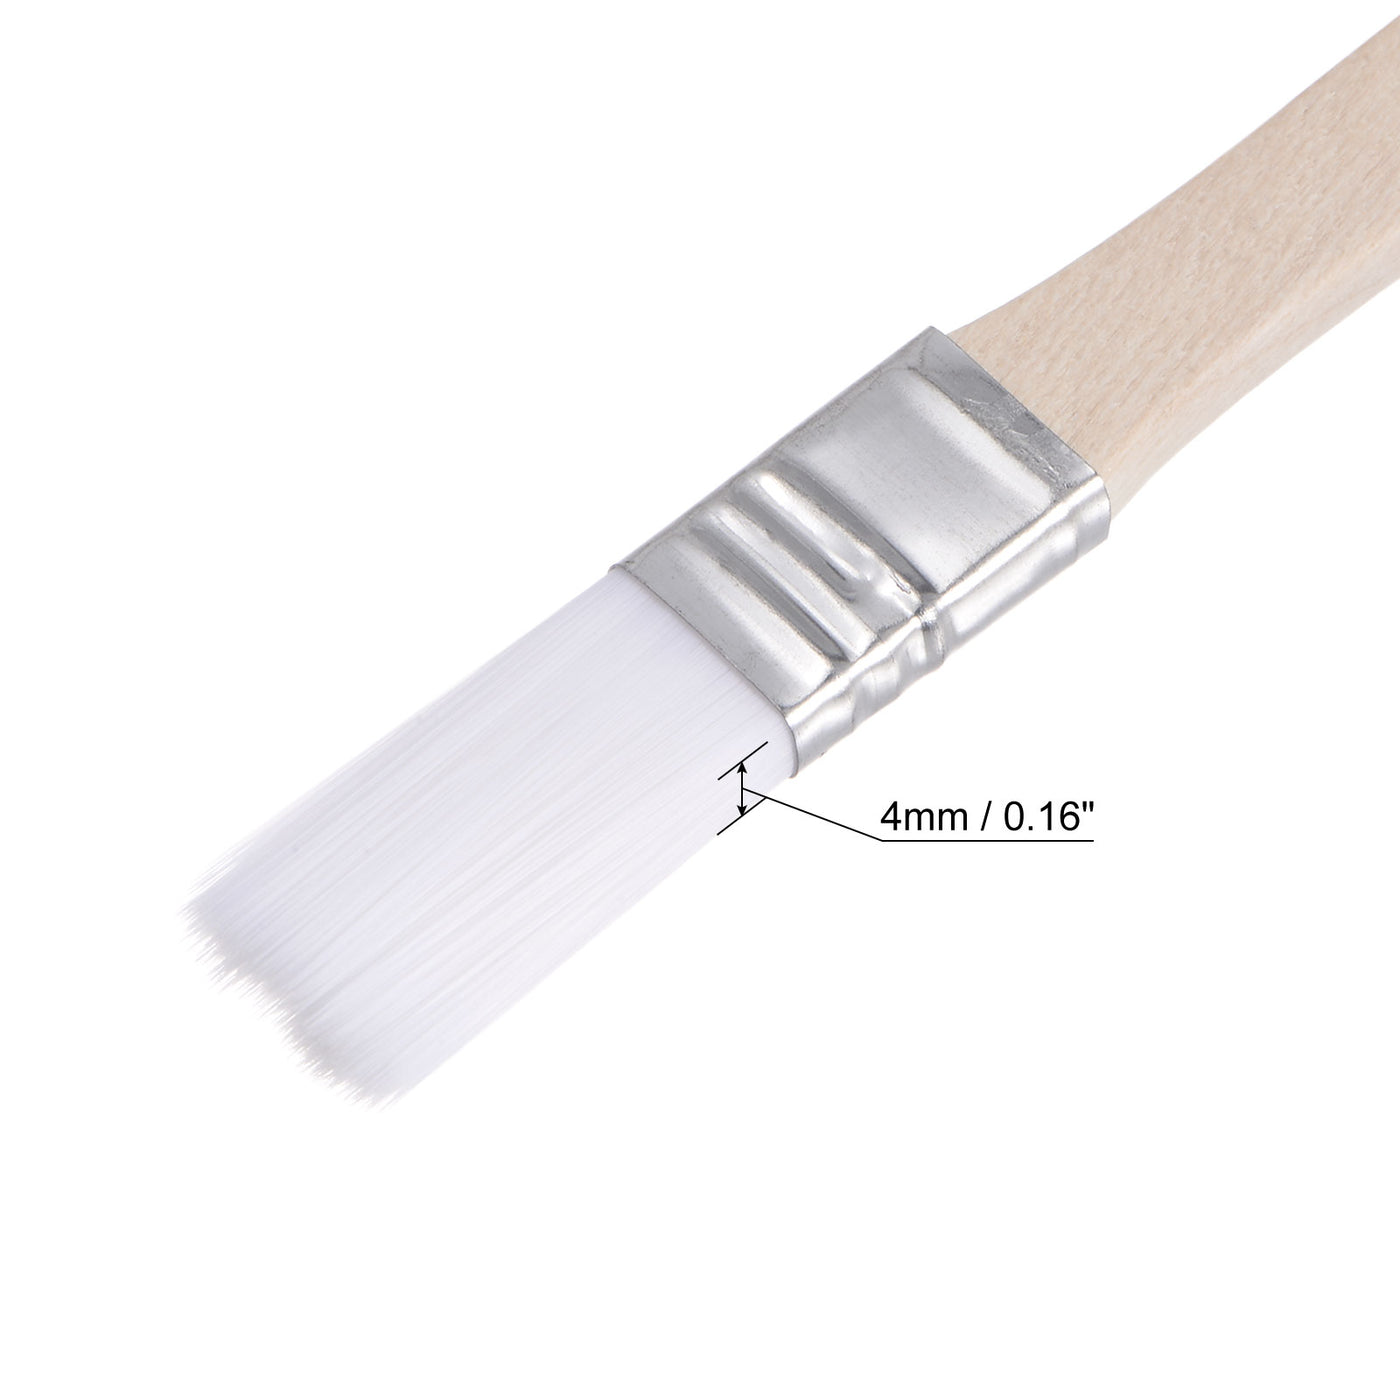 uxcell Uxcell 0.5" Width Small Paint Brush Nylon Bristle with Wood Handle Tool, White 10Pcs